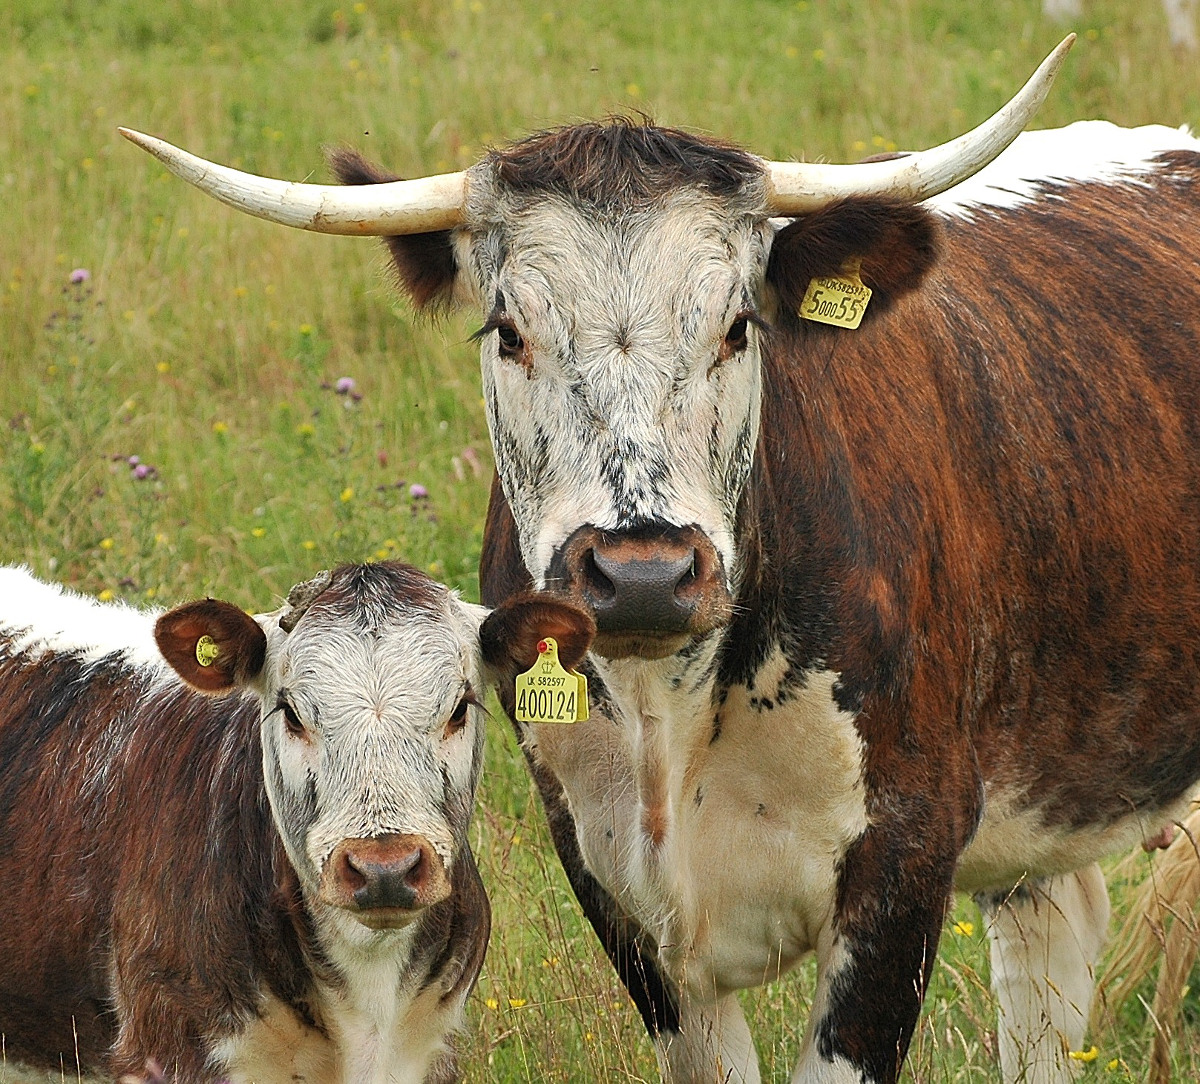 ‘Creation is God’s greatest evangelist.’ Longhorn cattle in Colvend, Scotland by Richard Mearns